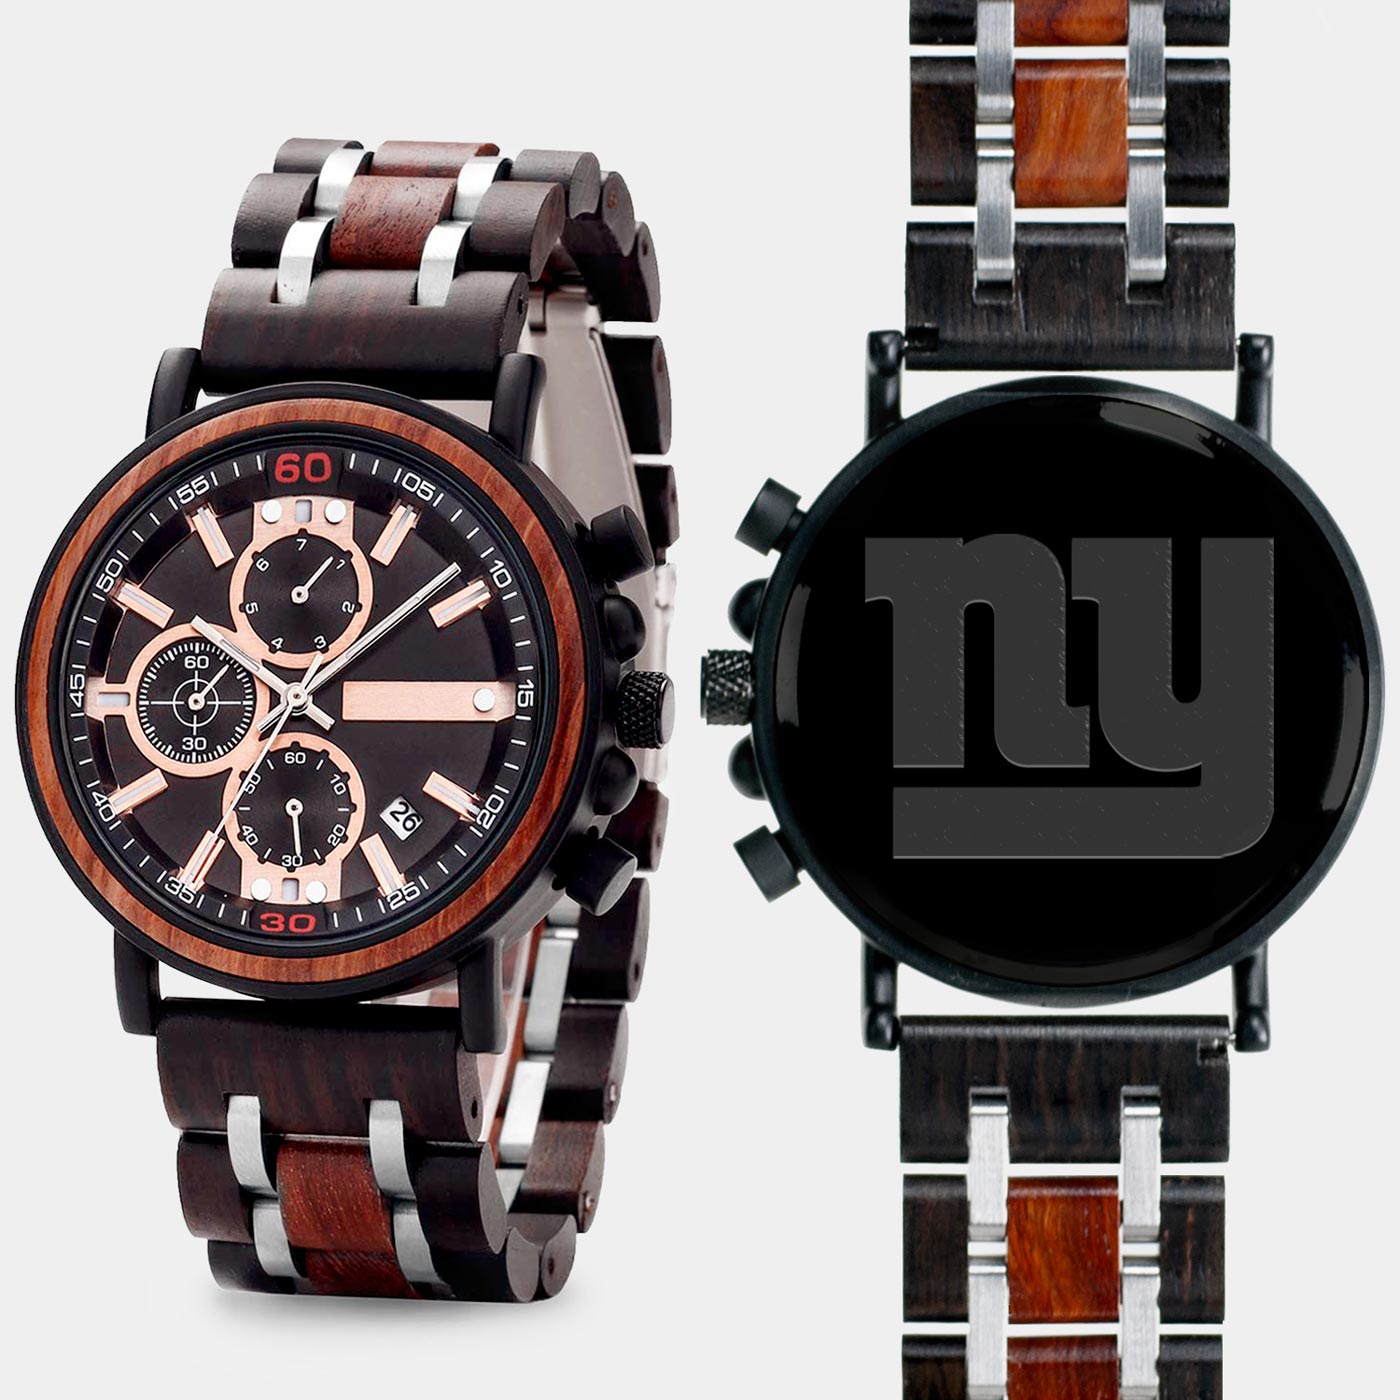 New York Giants Mens Wrist Watch  - Personalized New York Giants Mens Watches - Custom Gifts For Him, Birthday Gifts, Gift For Dad - Best 2022 New York Giants Christmas Gifts - Black 45mm NFL Wood Watch